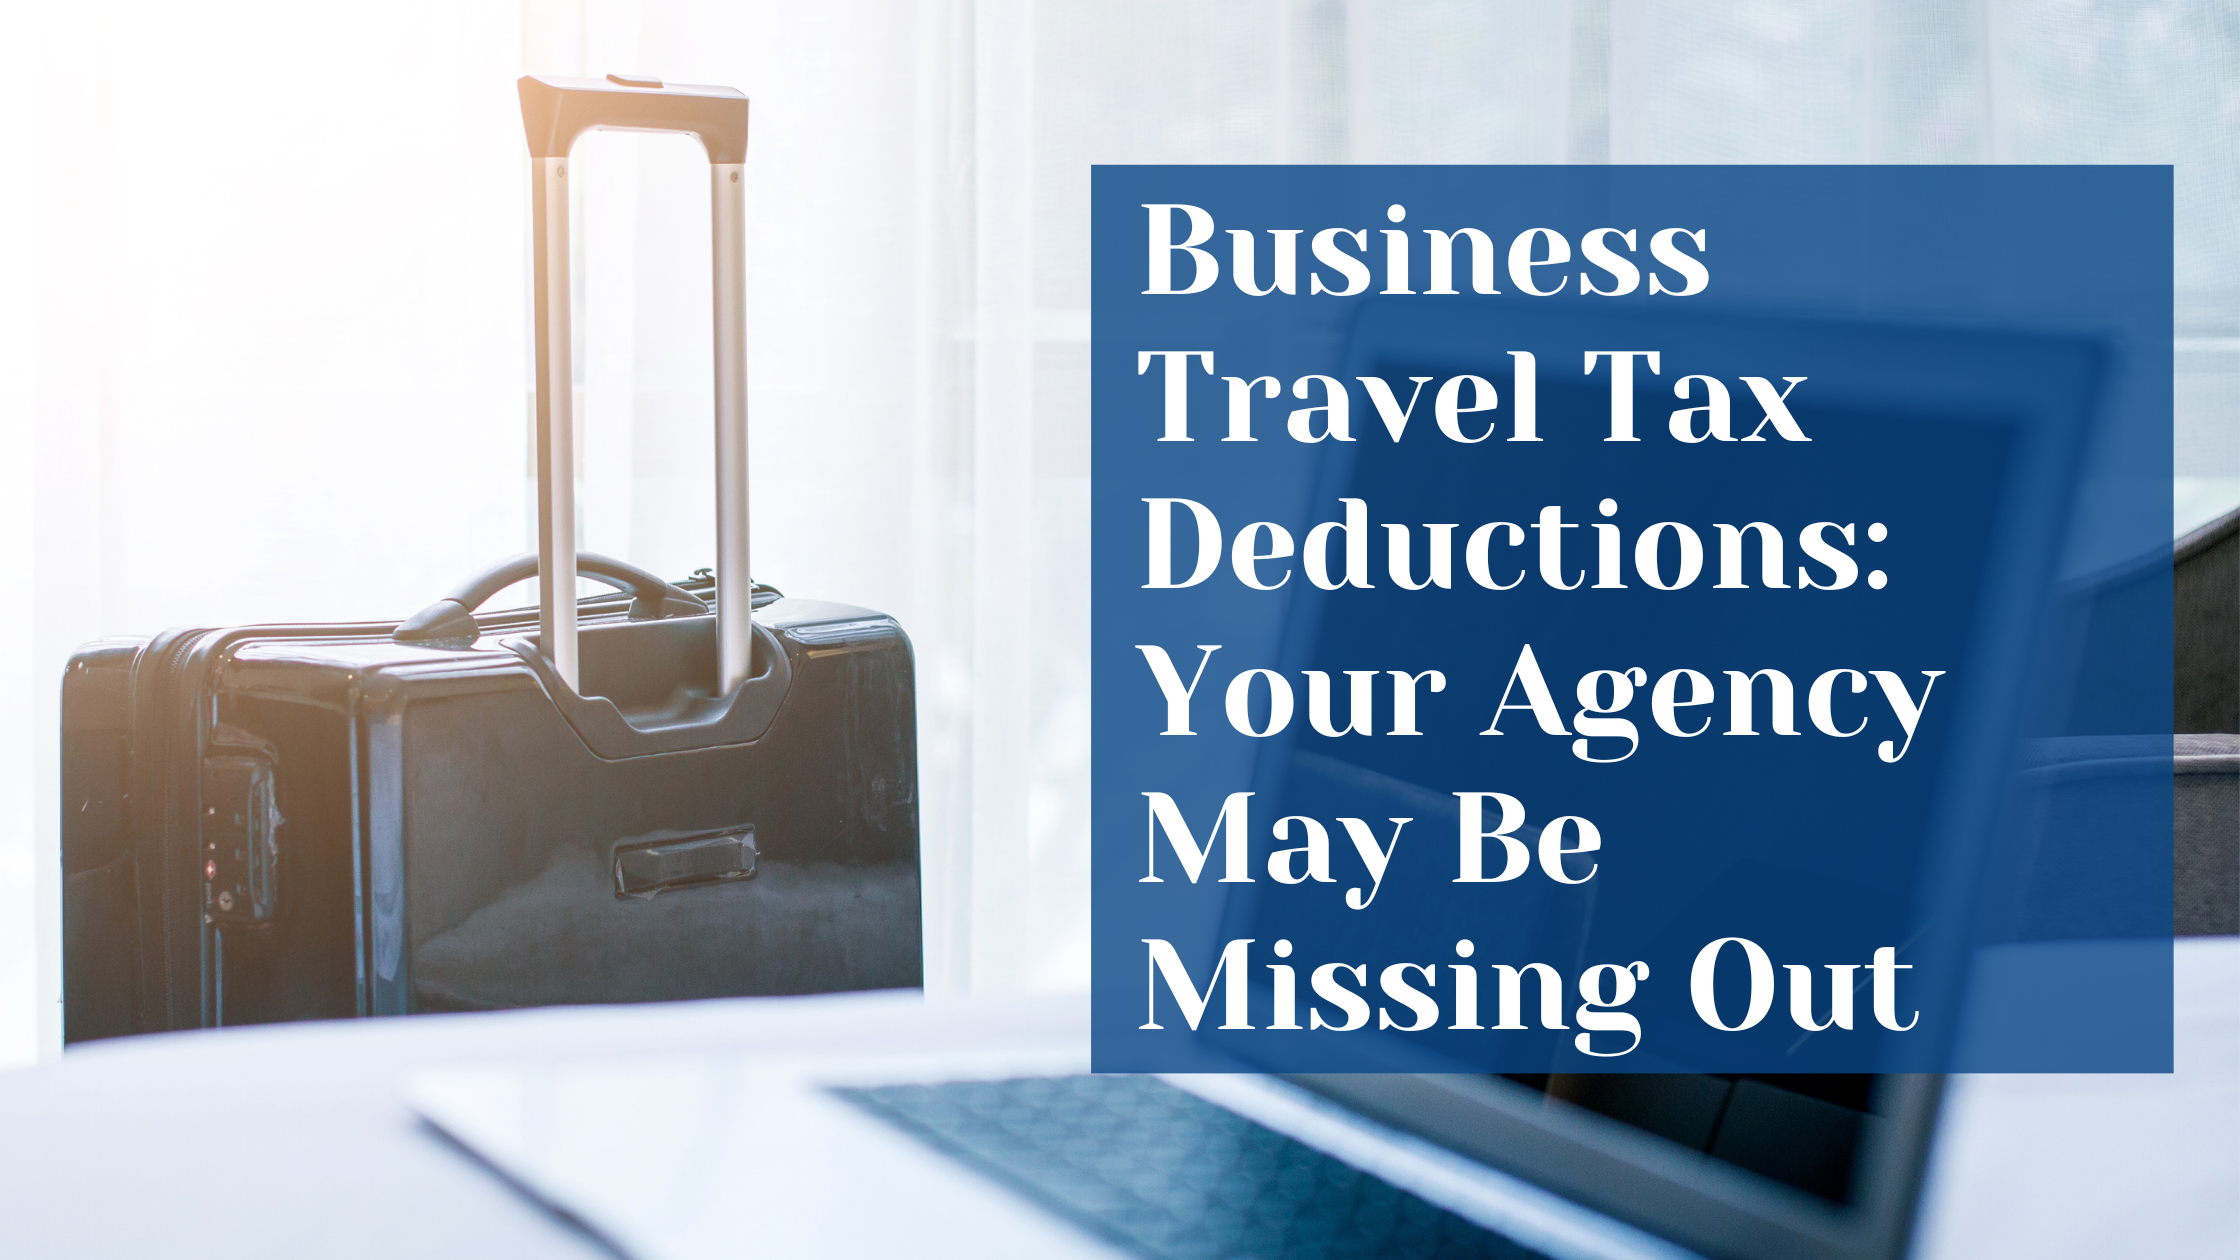 Business Travel Tax Deductions: Your Agency May Be Missing Out